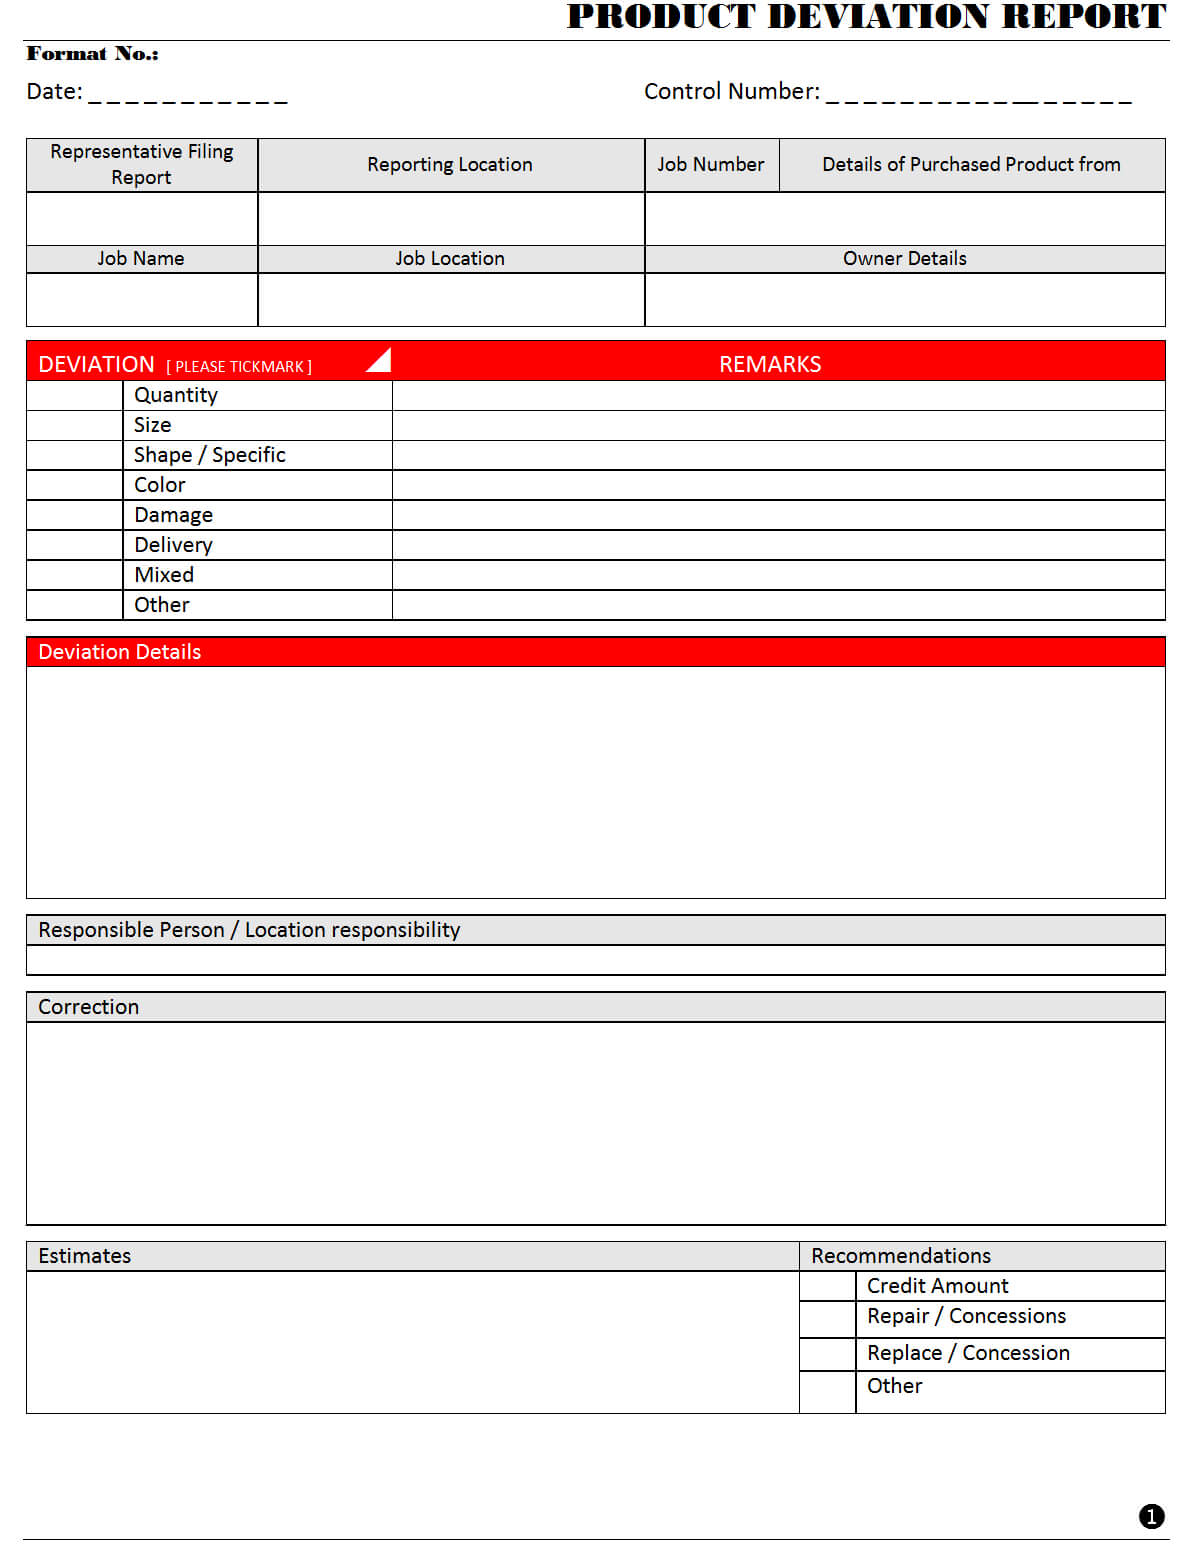 Product Deviation Report - For Deviation Report Template